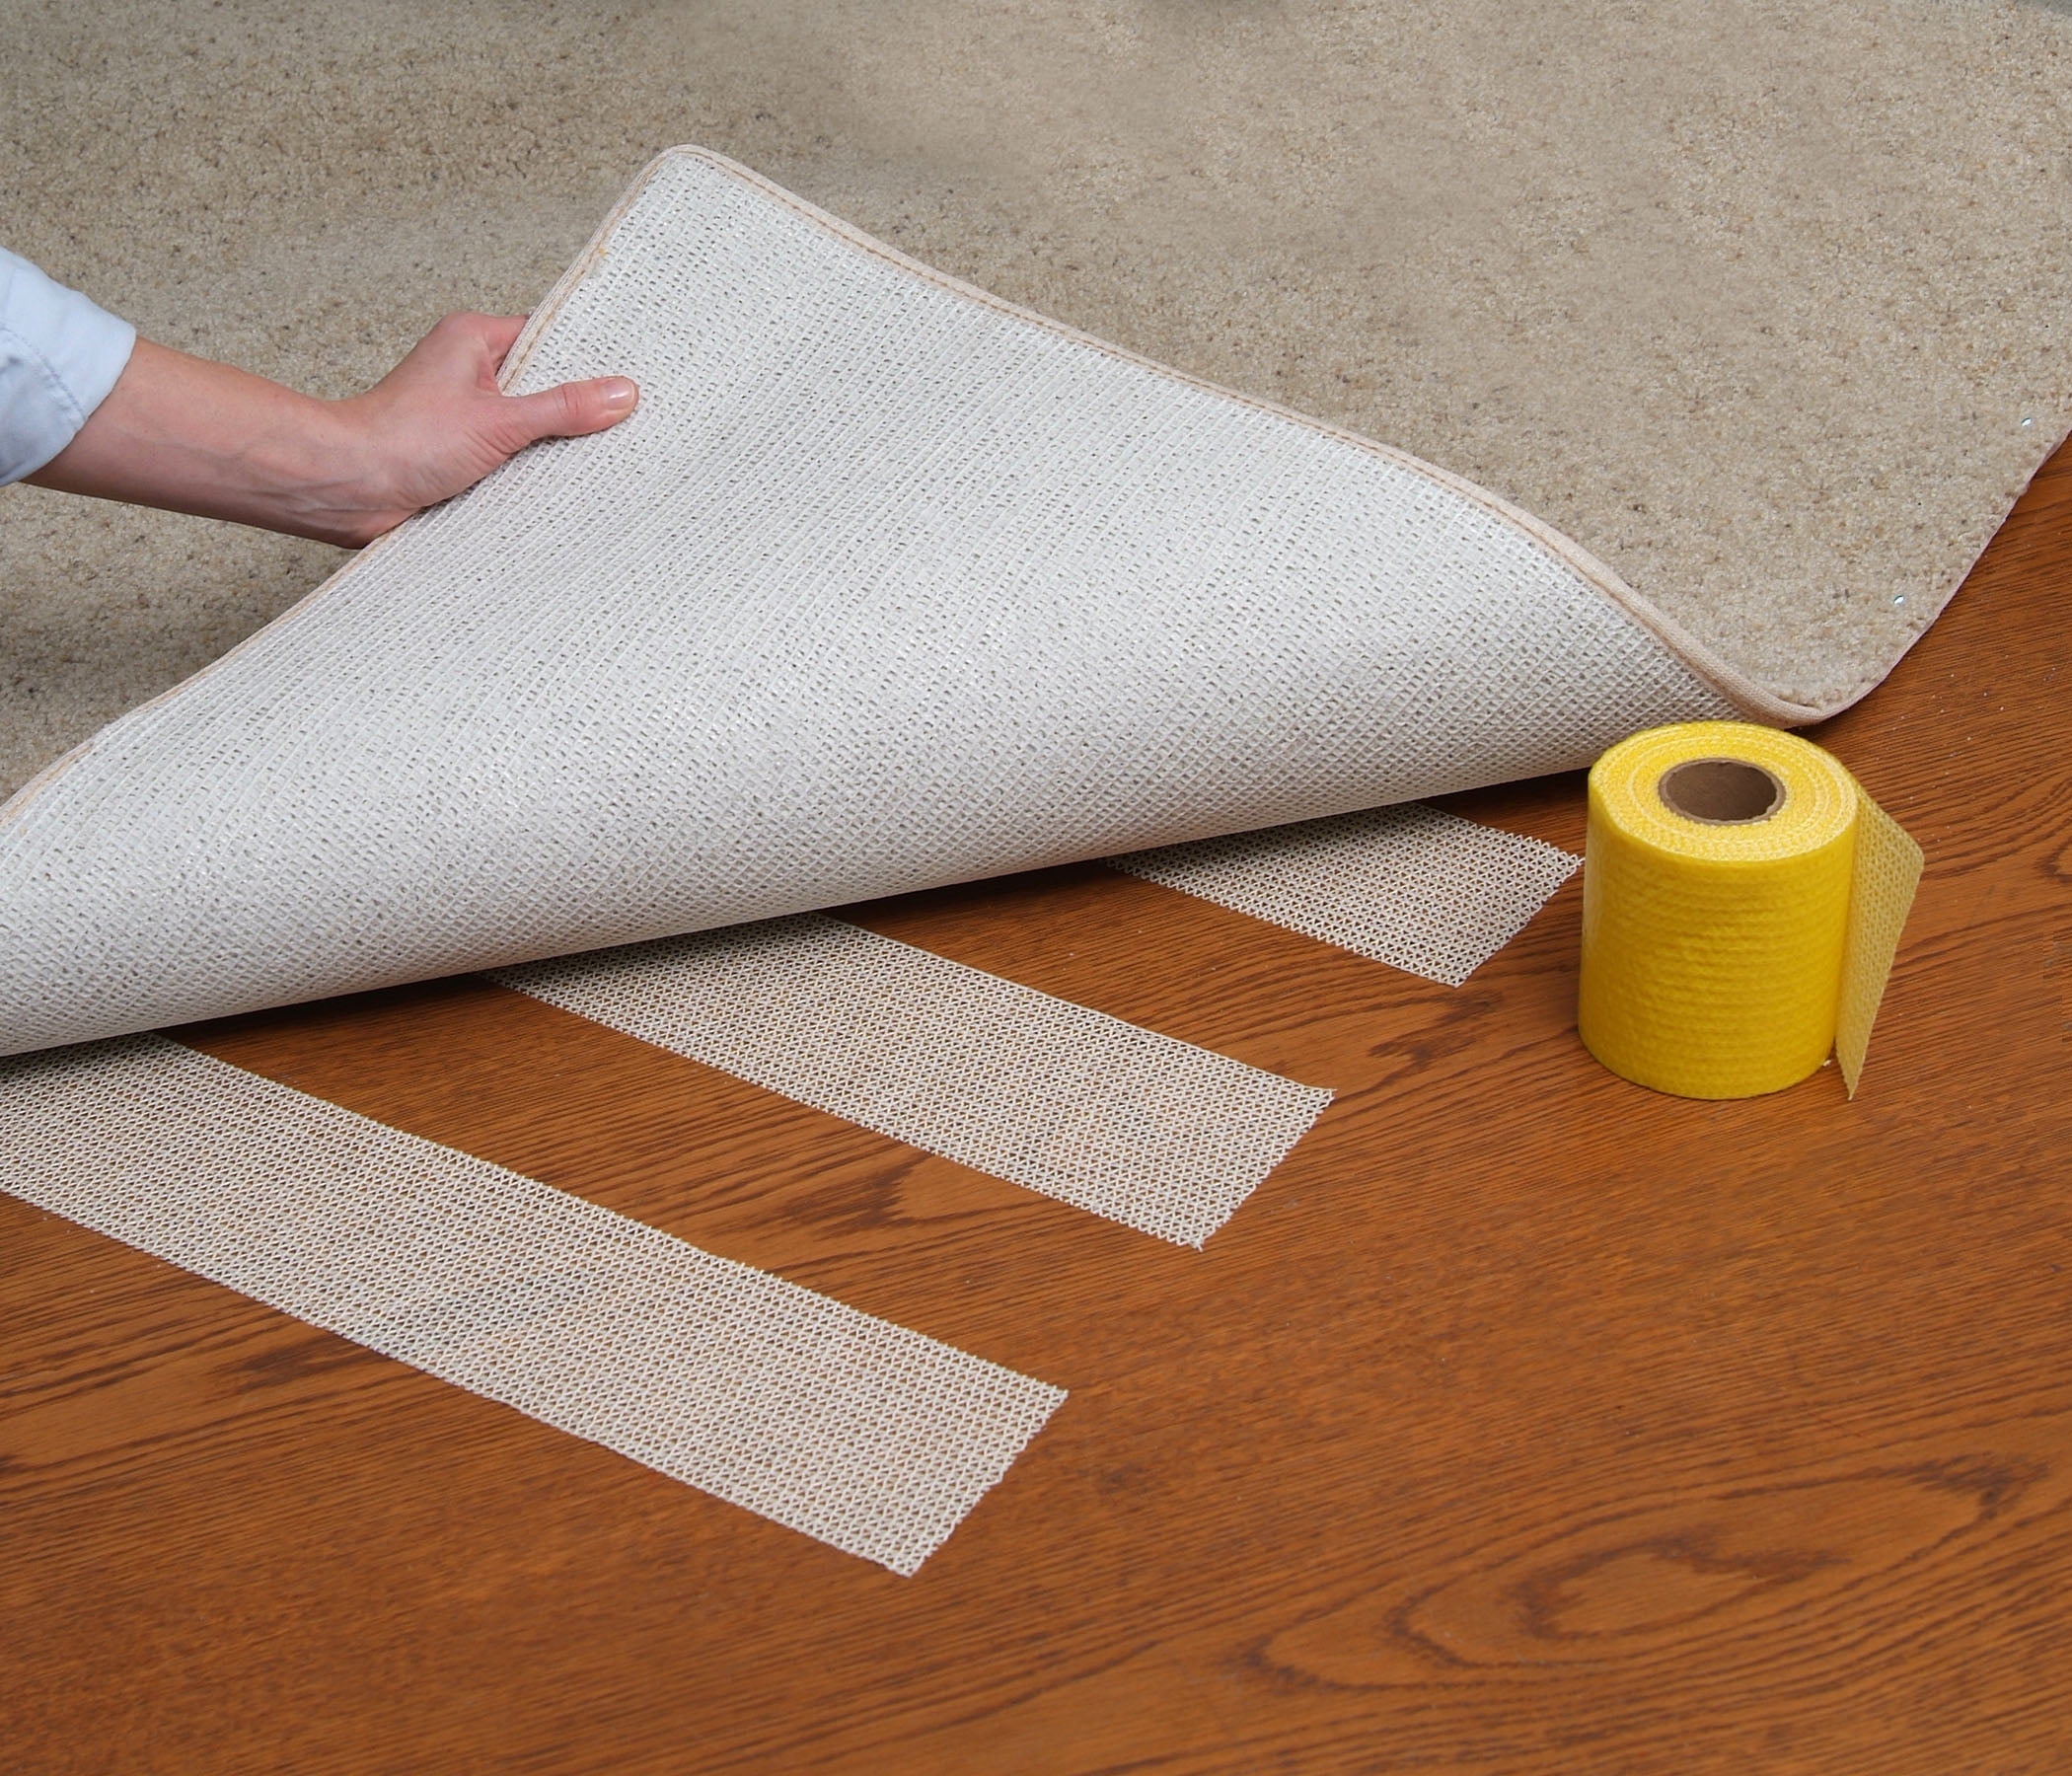  Rug Grip Rug Gripper Tape for Area Rugs and Runners, Non-Slip Carpet  Tape Works on Carpet, Tile and Hardwood Floors, 2.5in.x25ft. : Home &  Kitchen